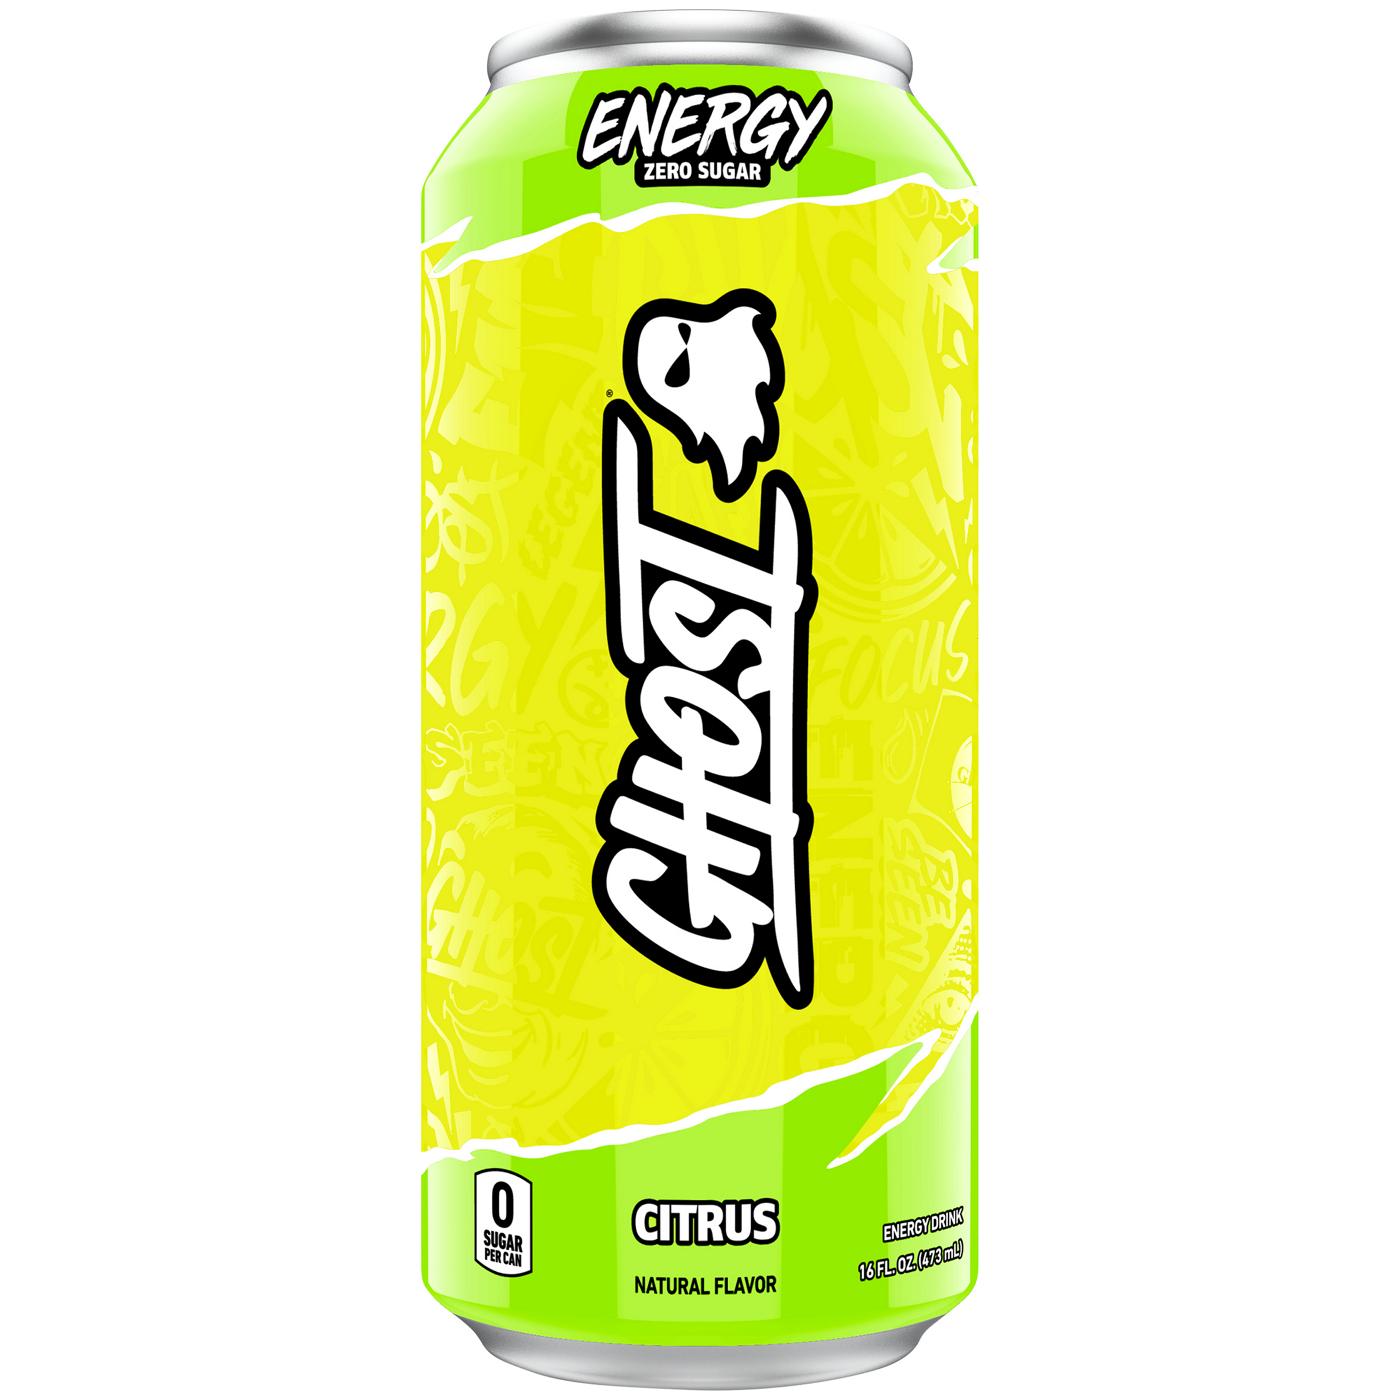 Ghost Energy Citrus Drink; image 2 of 2